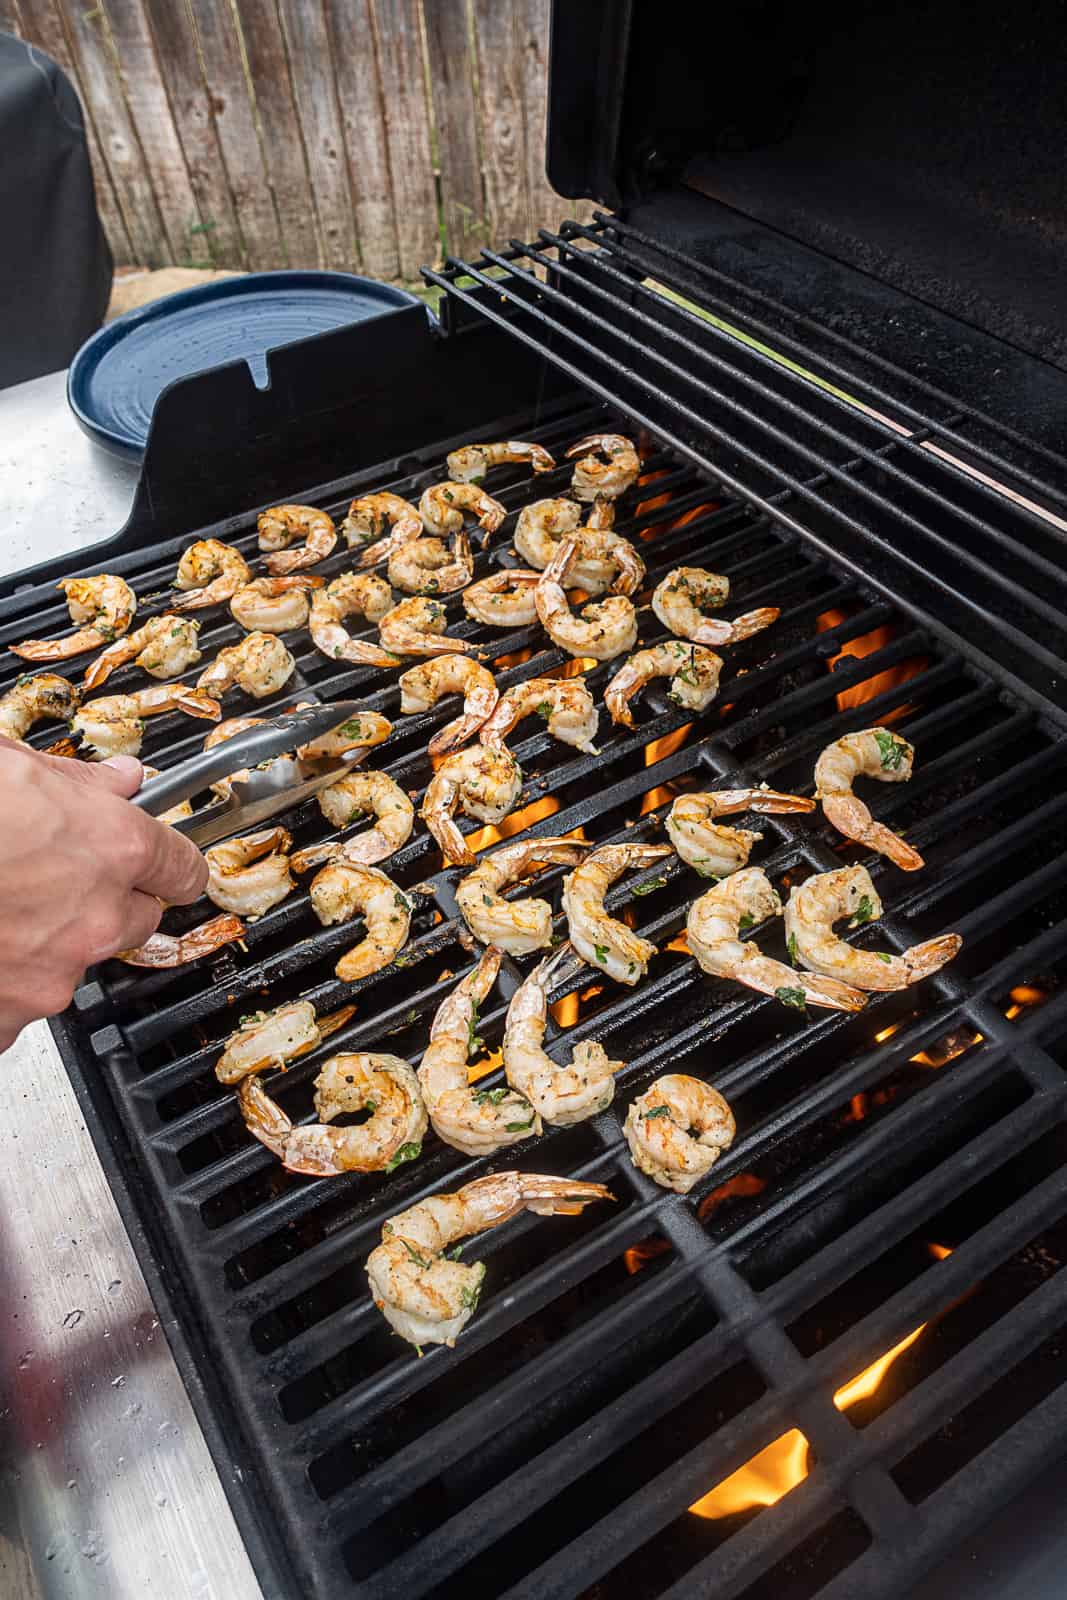 Weber Spirit 2 Gas Grill with hand cooking Grilled Shrimp Recipe